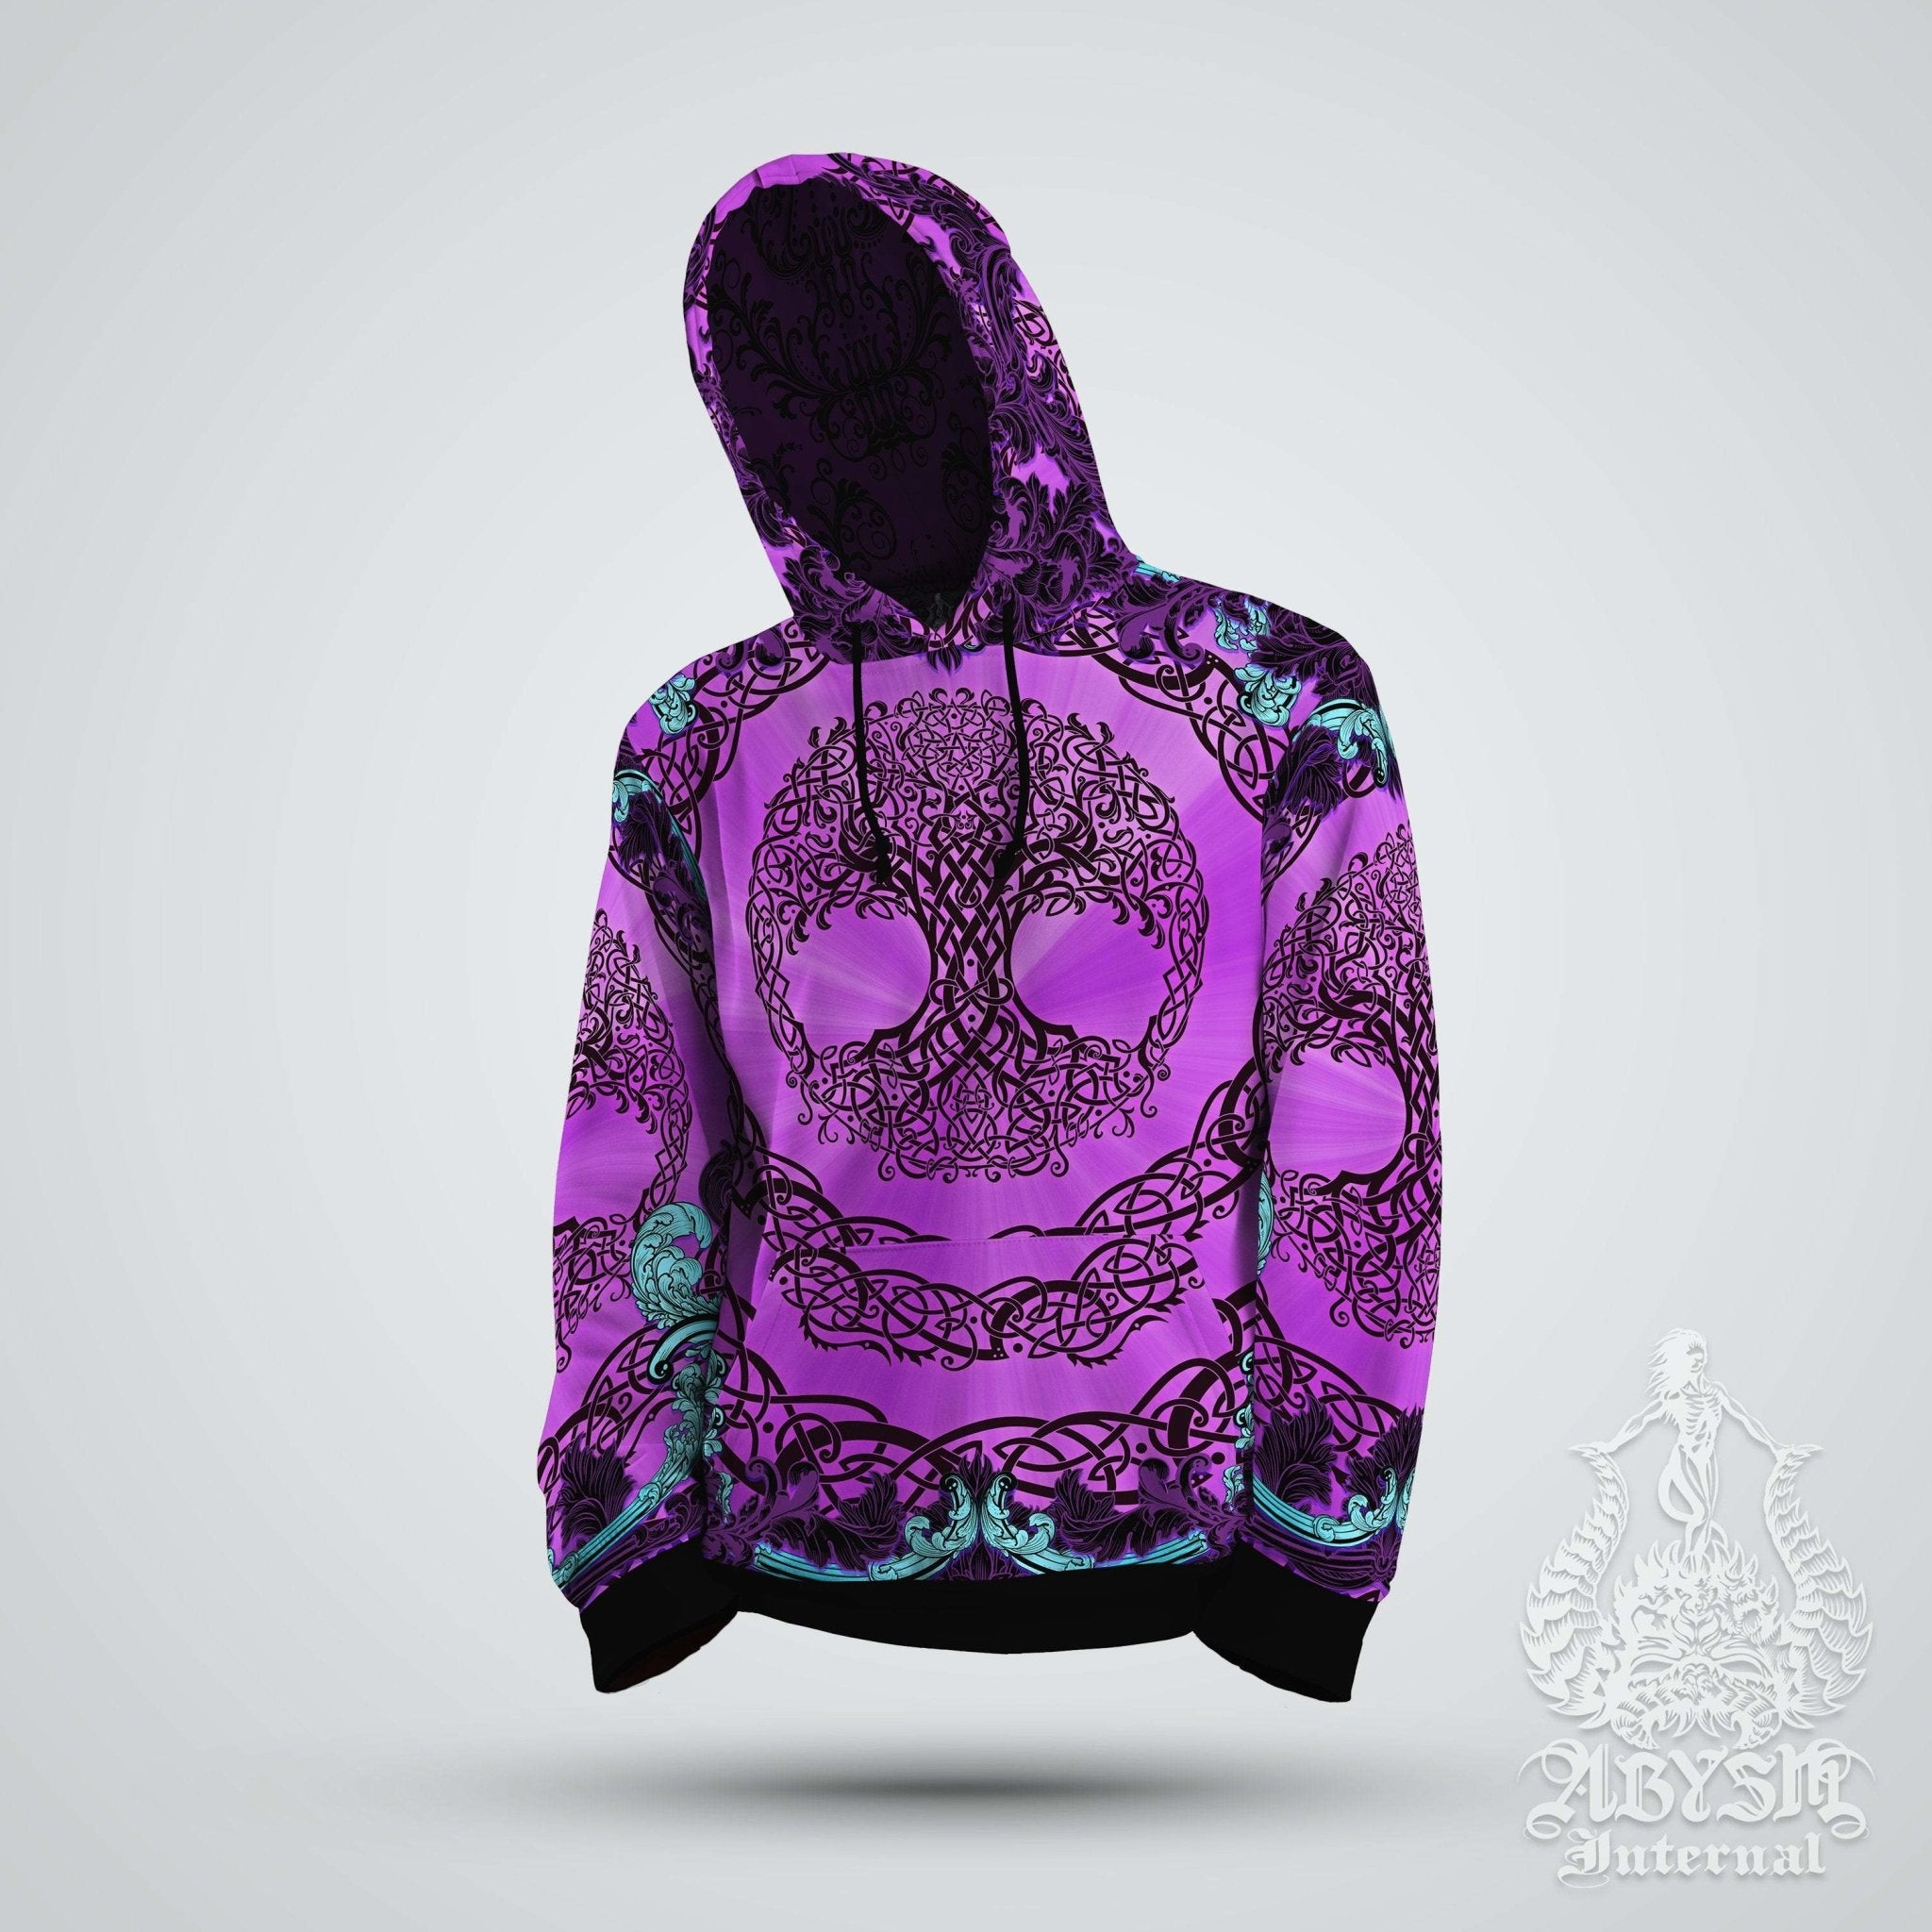 Witchy Hoodie, Pagan Streetwear, Witch Outfit, Pastel Goth Sweater, Alternative Clothing, Unisex - Purple Celtic Tree of Life - Abysm Internal